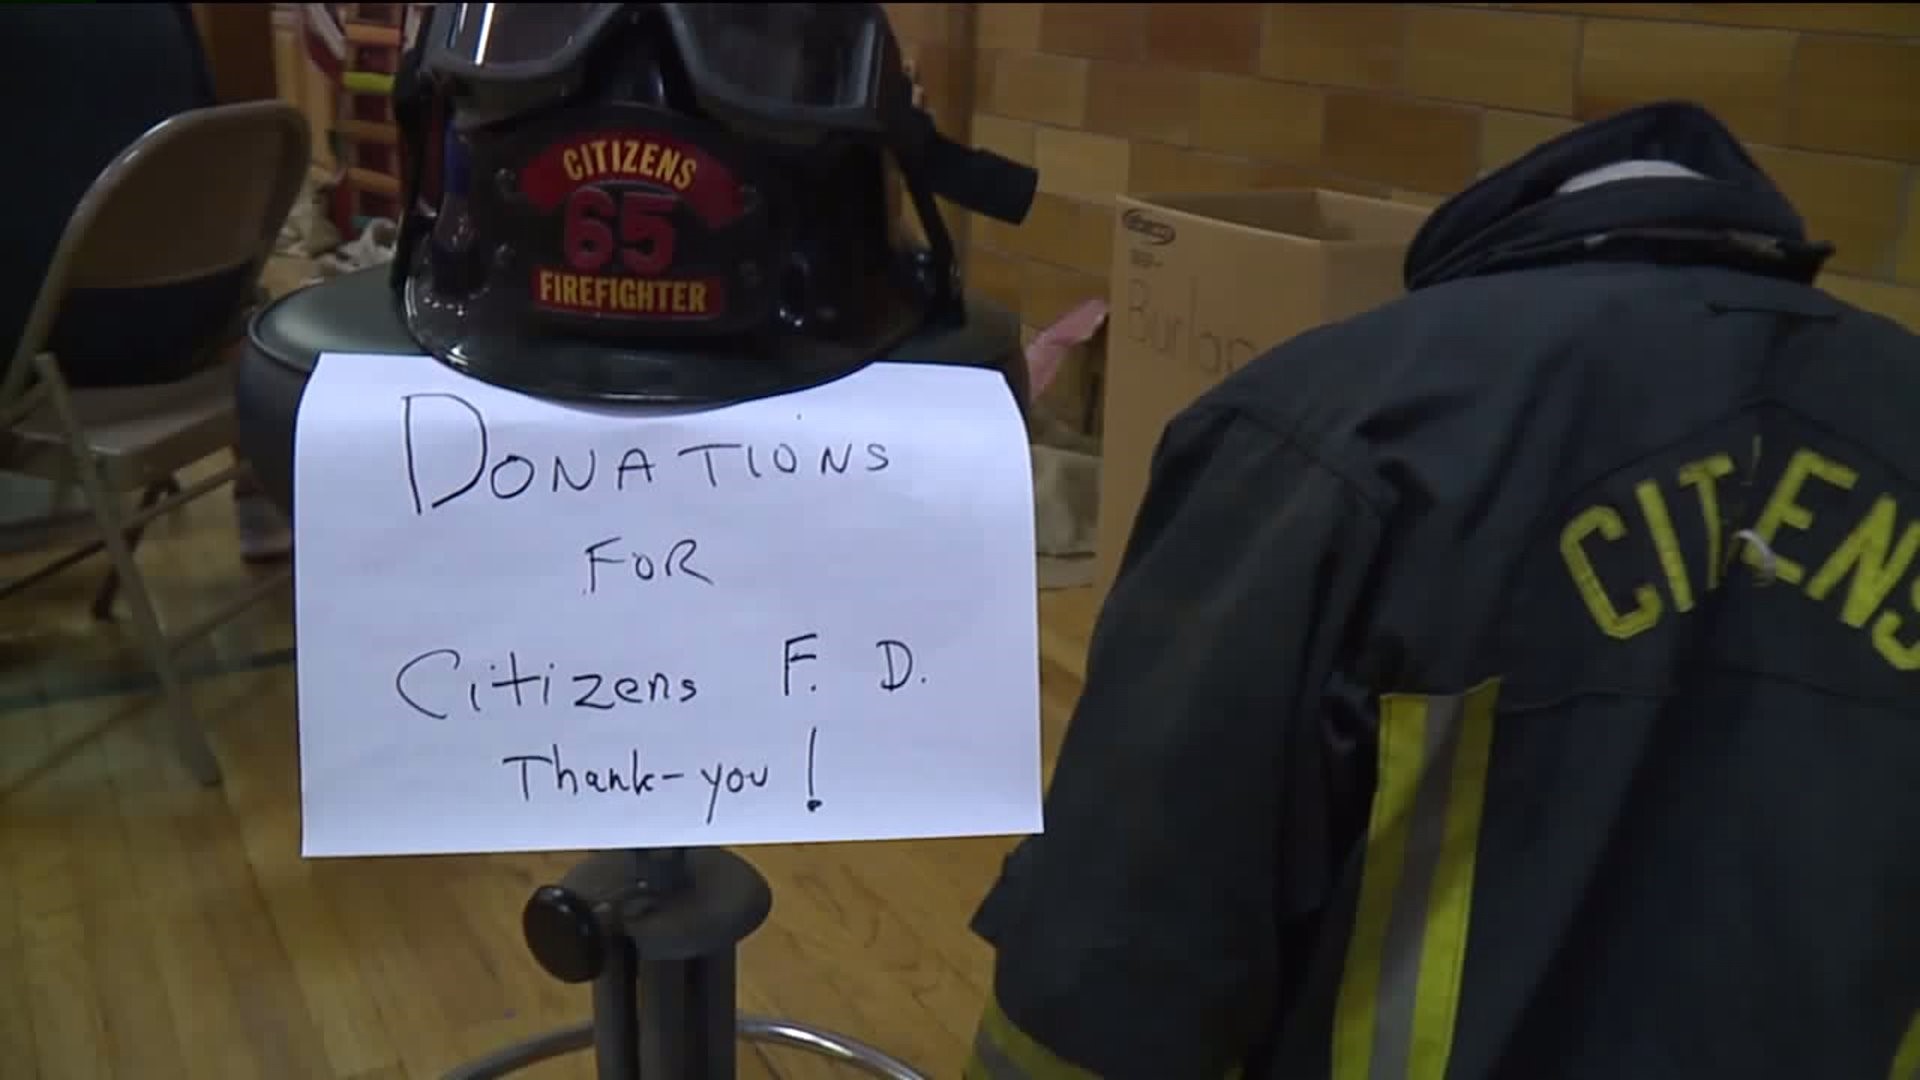 Church Steps in to Scoop up Funds for Fire Company in Tamaqua